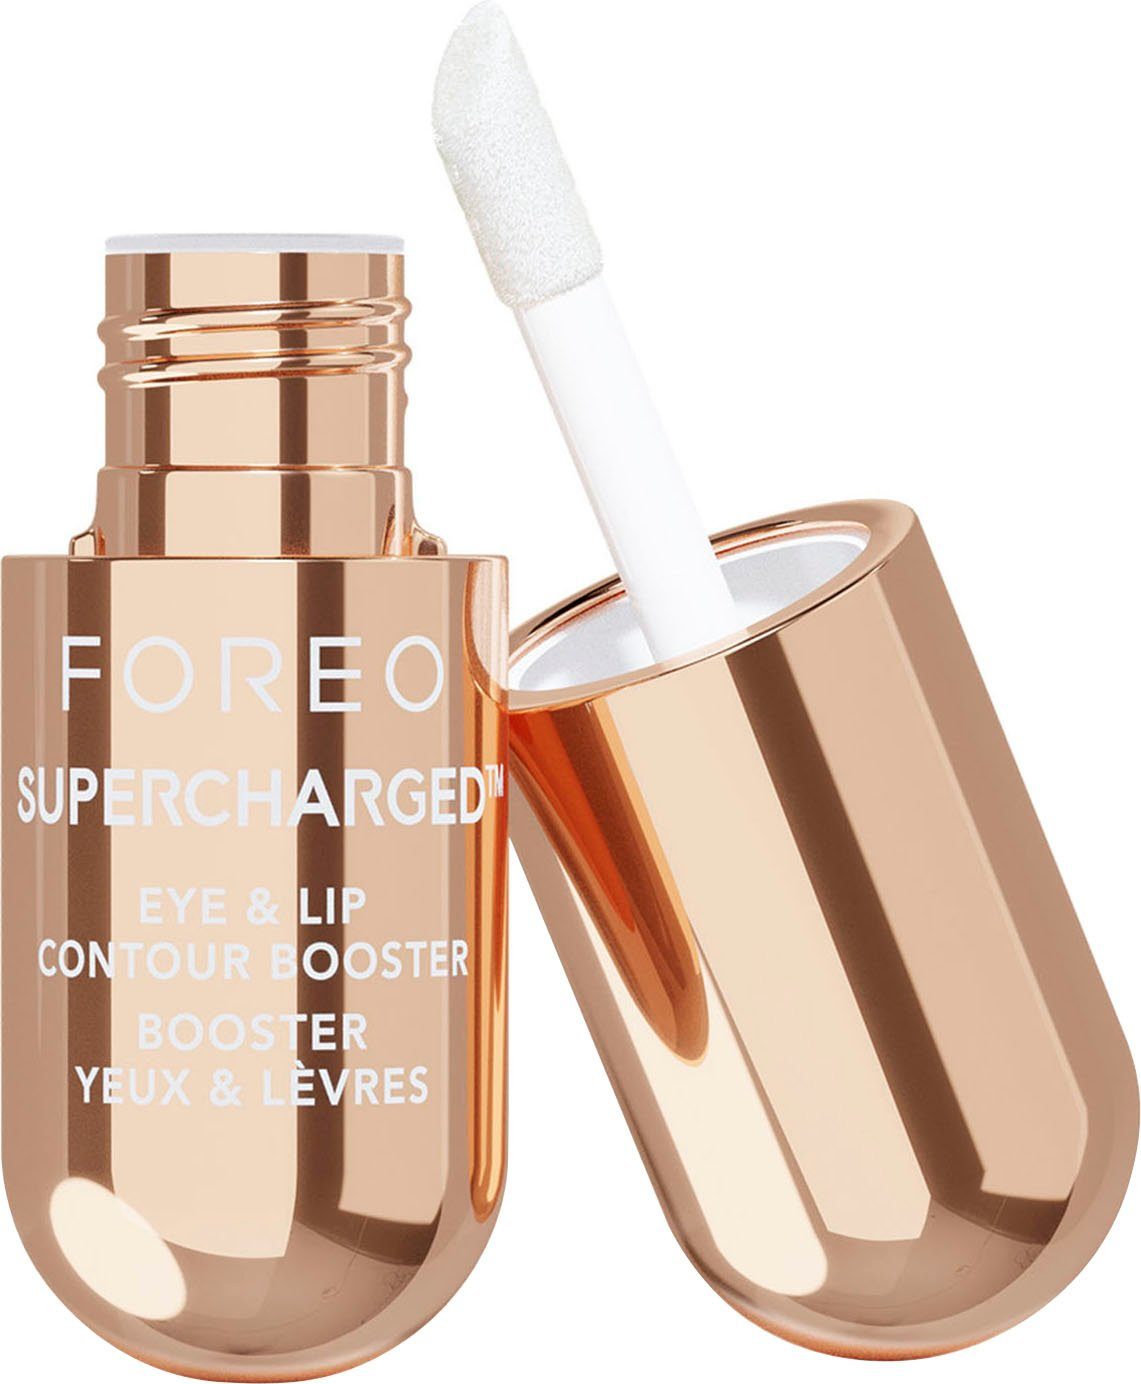 FOREO Feuchtigkeitsgel SUPERCHARGED™ EYE & LIP CONTOUR BOOSTER 3 x 3,5 ml Packung, 3-tlg.